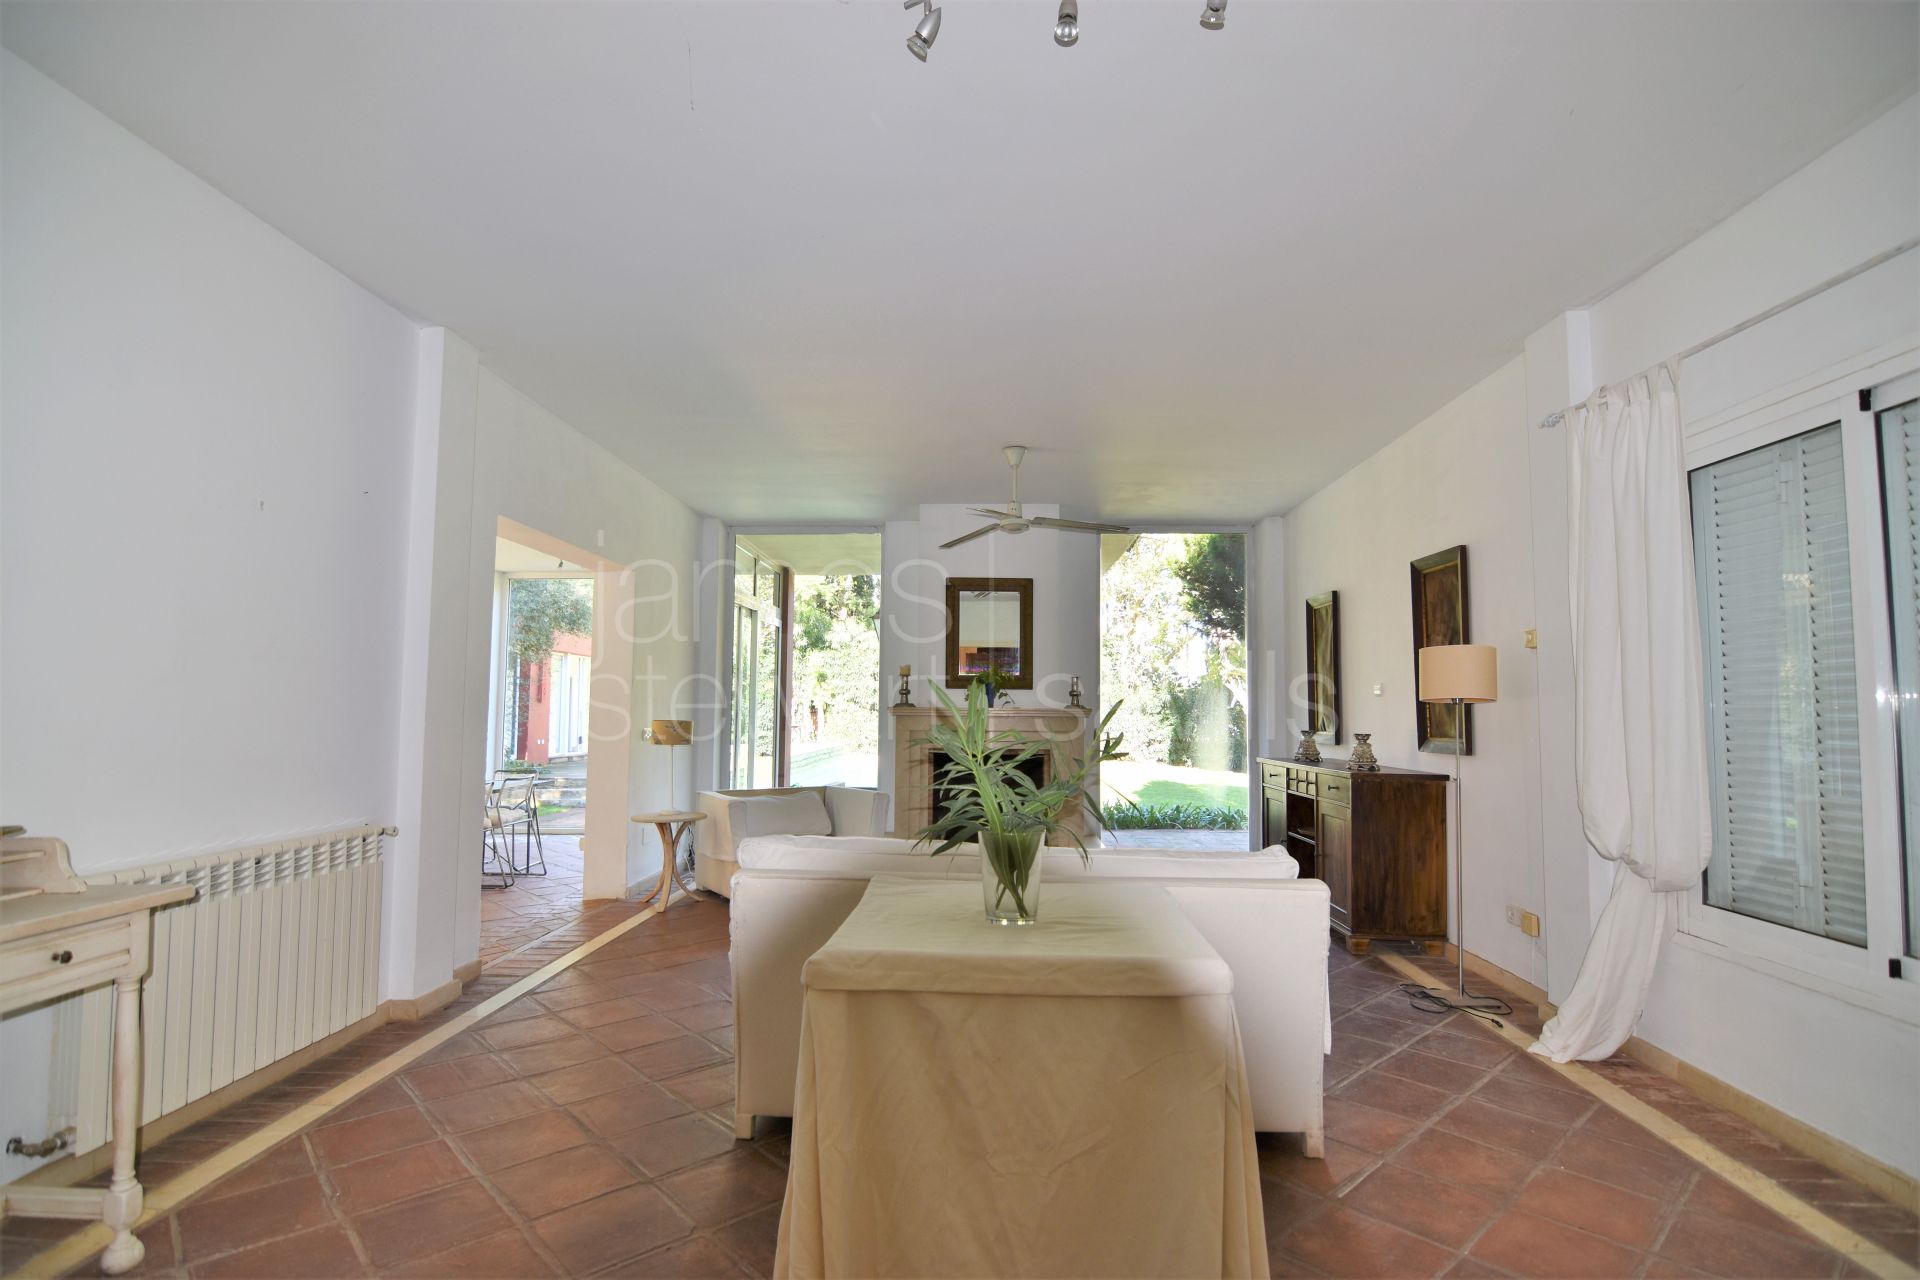 Single storey villa with guest house discreetly located in the Kings & Queens of Sotogrande Costa